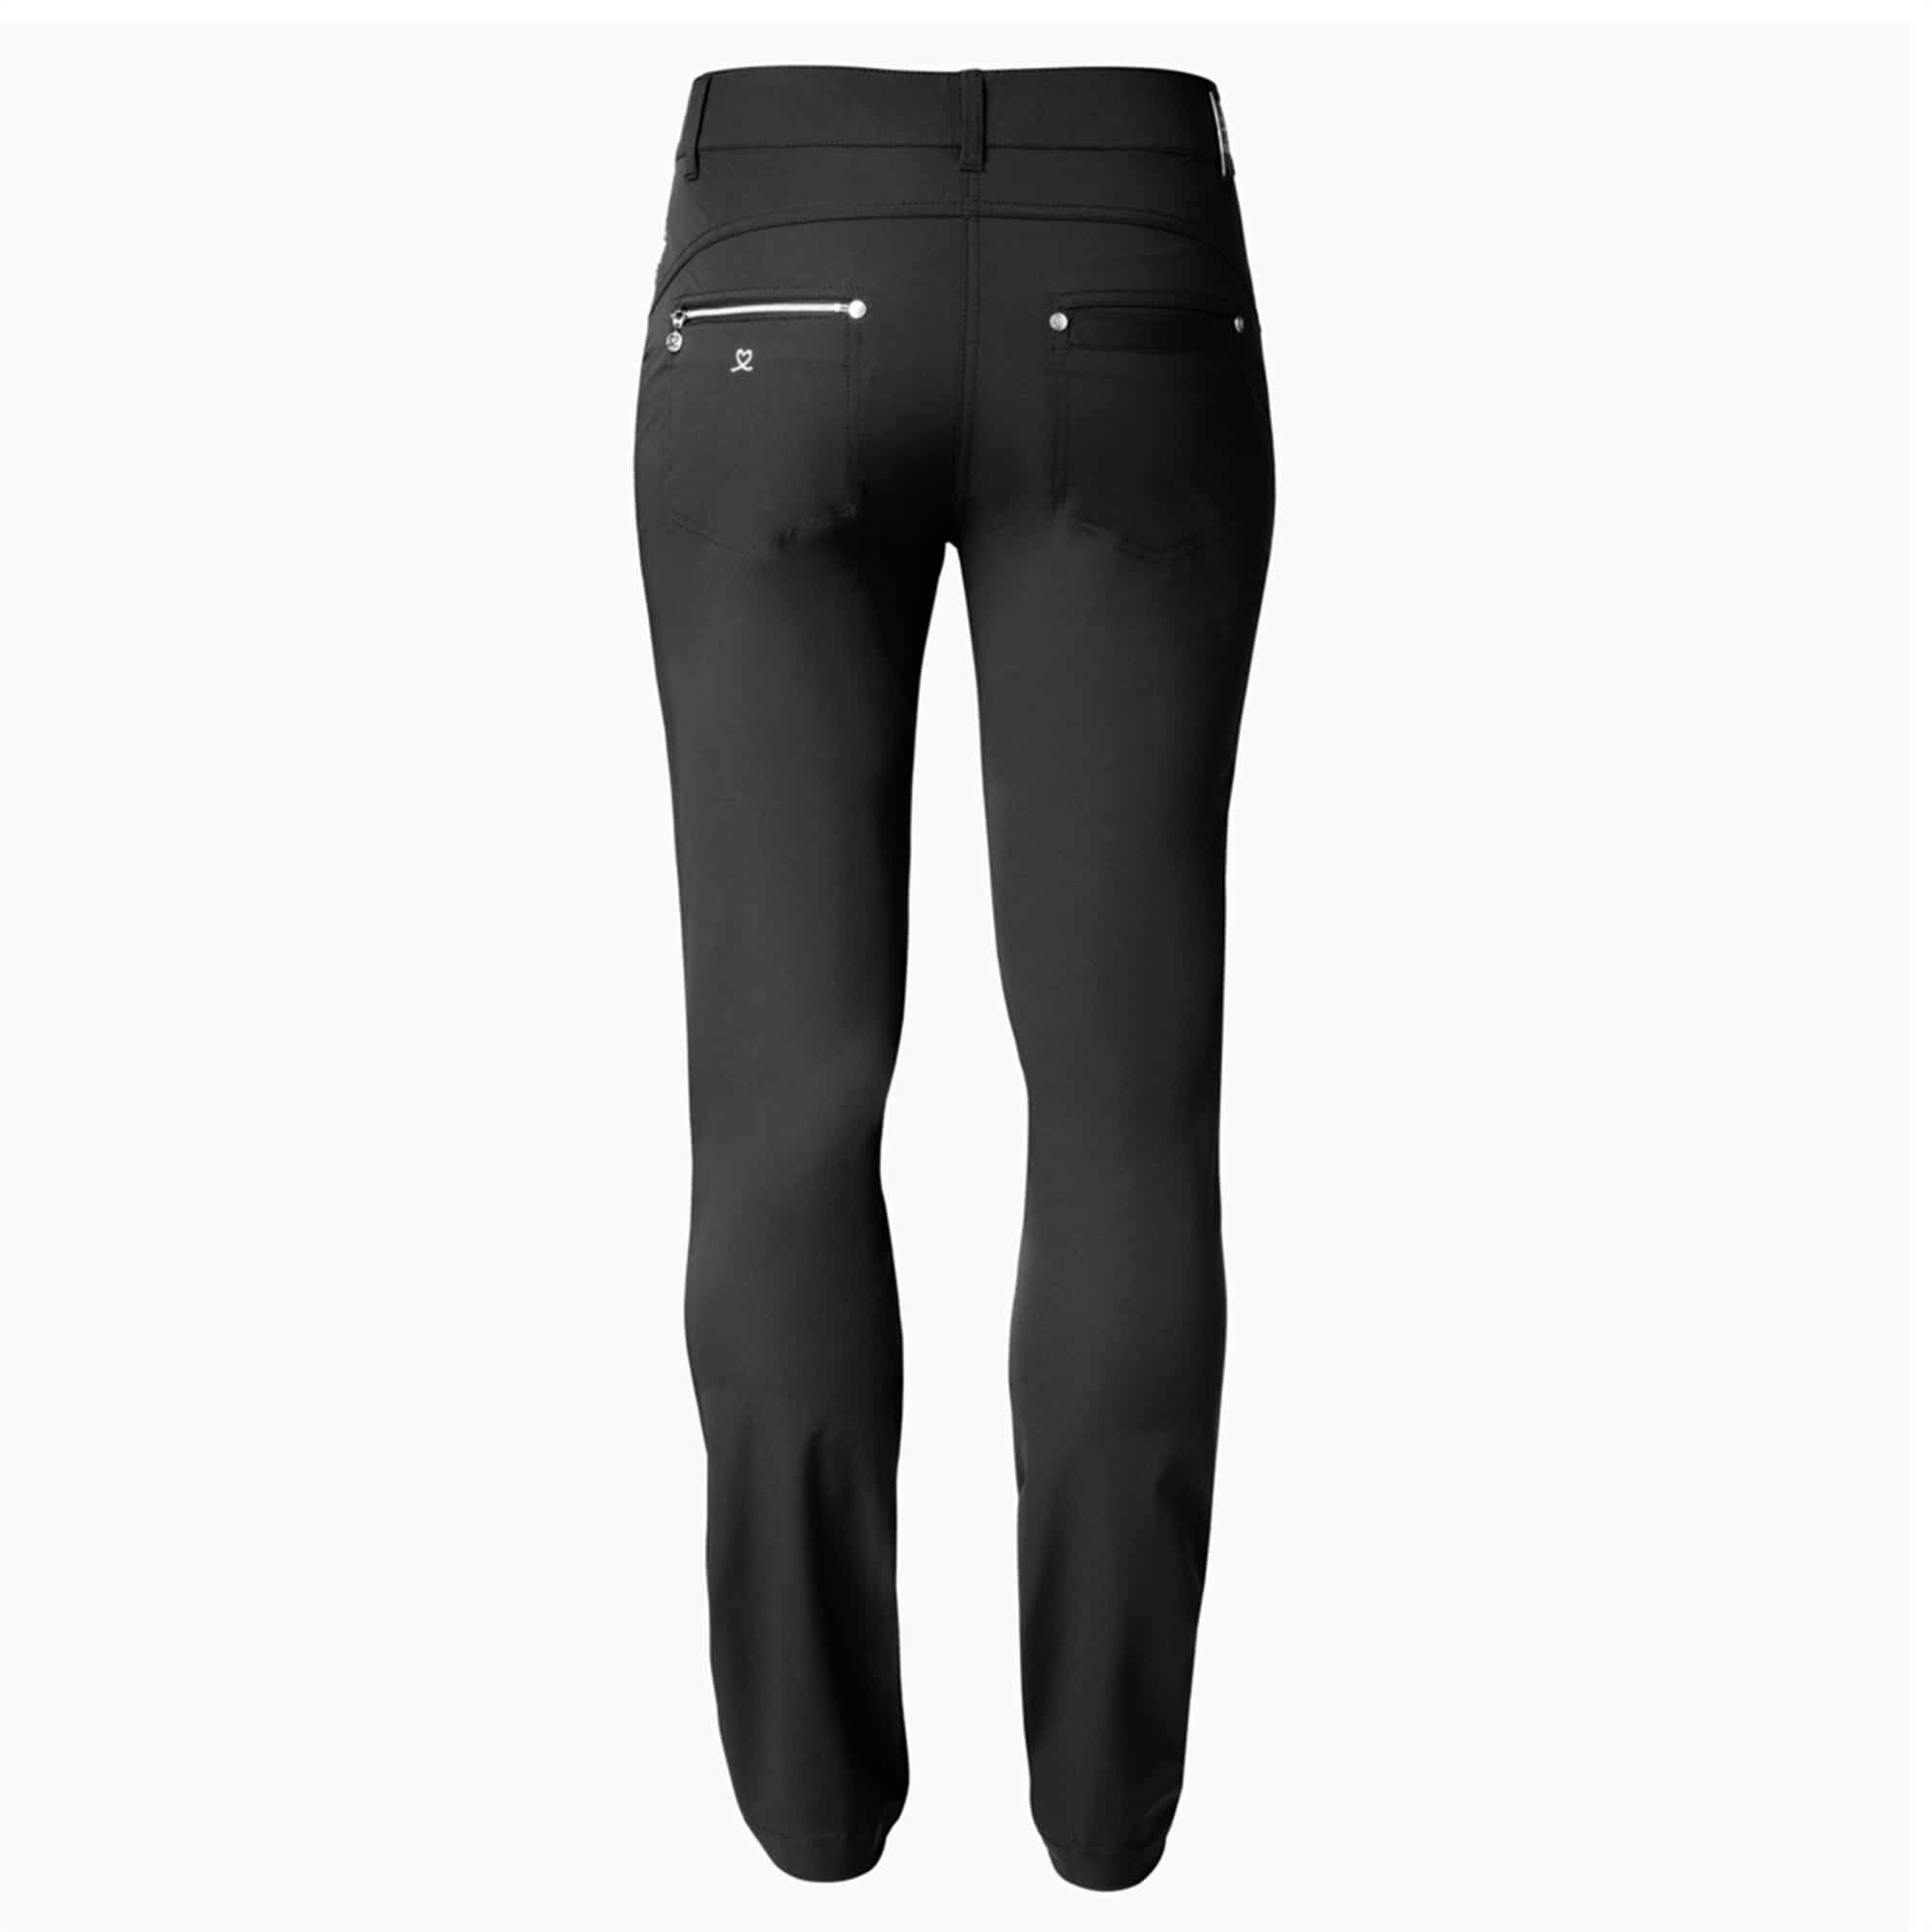 Daily Sports Miracle Trousers Black 29 Inch Leg